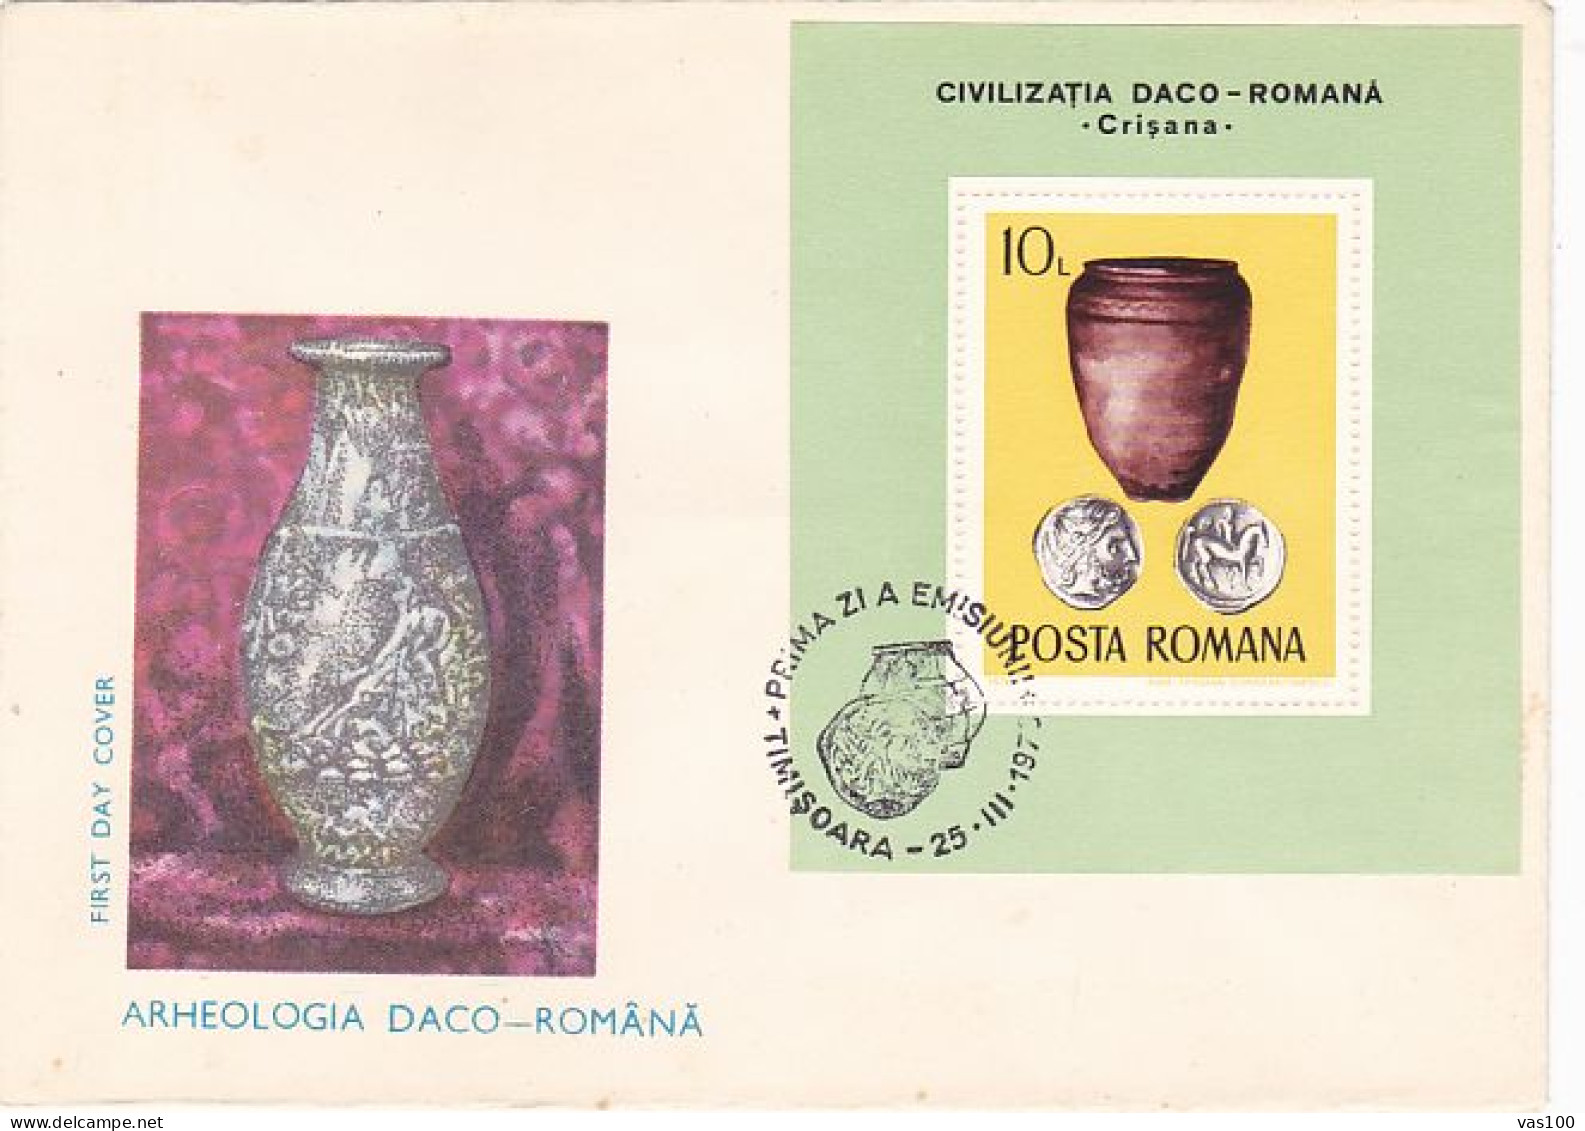 ARCHAEOLOGY, ANCIENT DACIAN AND ROMAN RELICS, COVER FDC, 1976, ROMANIA - Archeologia